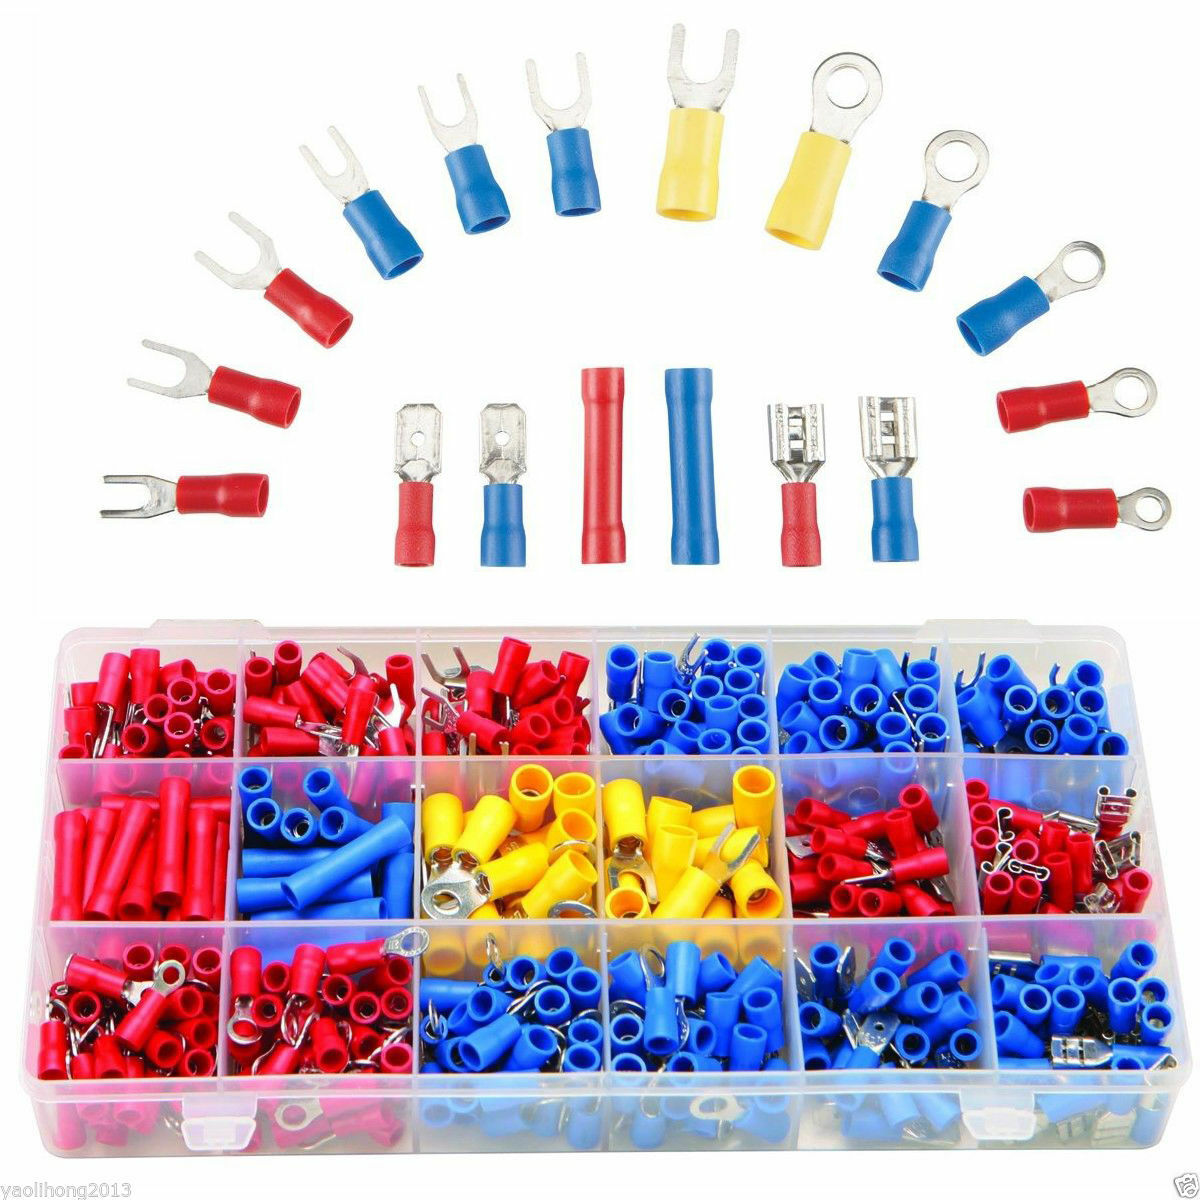 300pcs Assorted Crimp Terminals Set Insulated Electrical Wiring Connector Kit